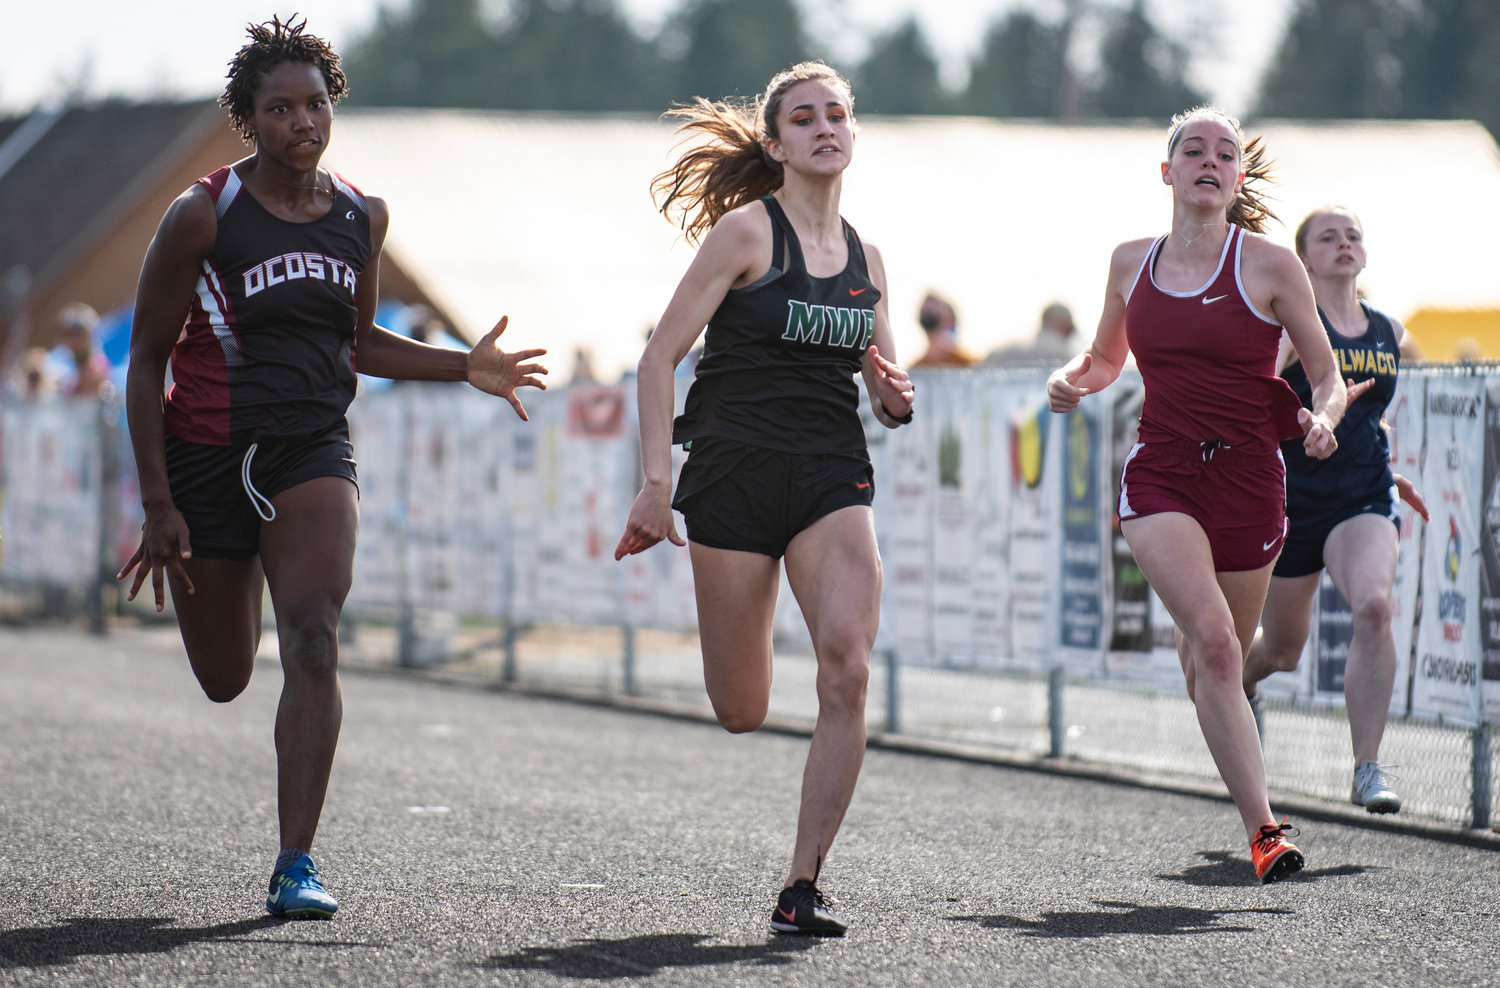 Morton-White Pass junior Jordan Koetje, middle, placed second in the girls 100-meter dash at the district championships Thursday.